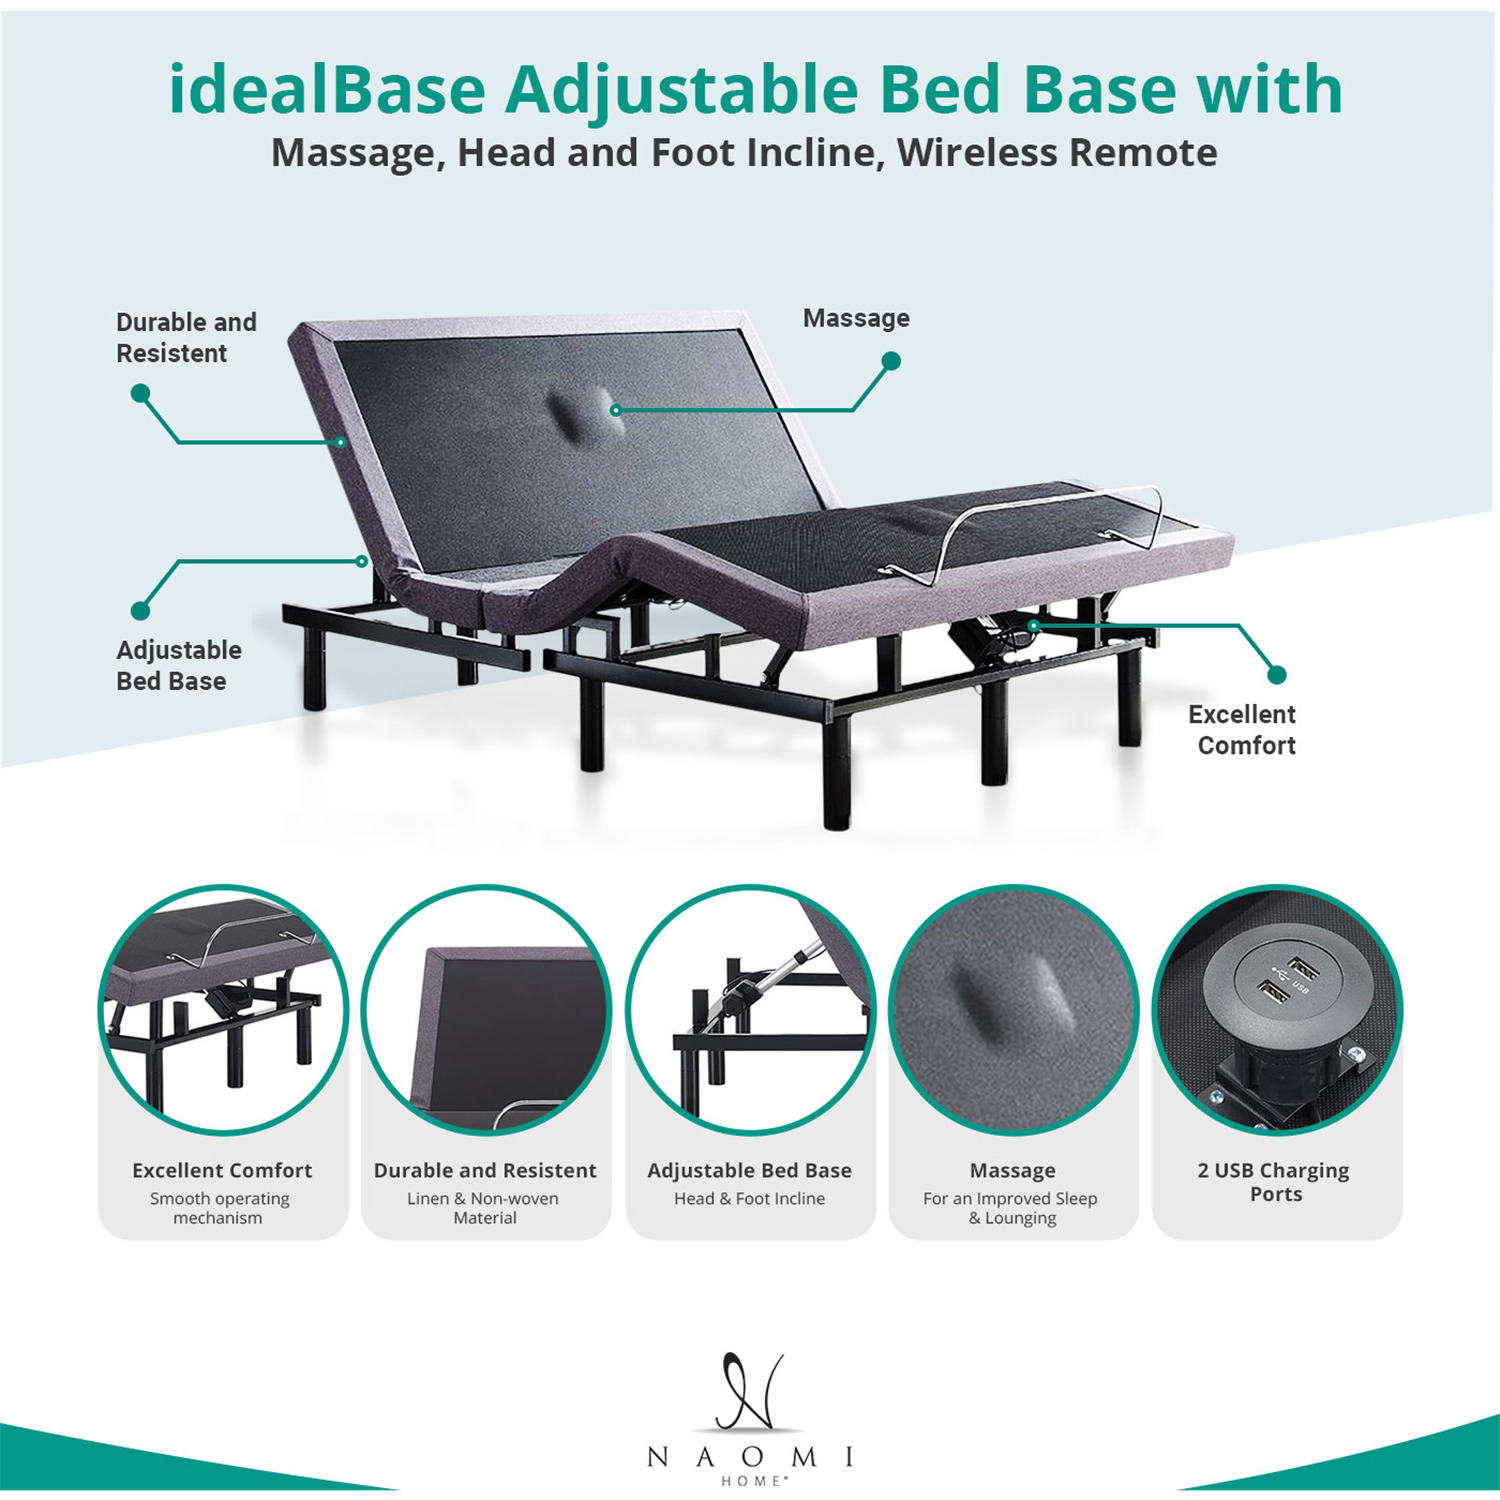 Modern Style Electric Adjustable with Memory Foam Mattress Massage Bed -  China Massage Bed, Adjustable Bed Supplier